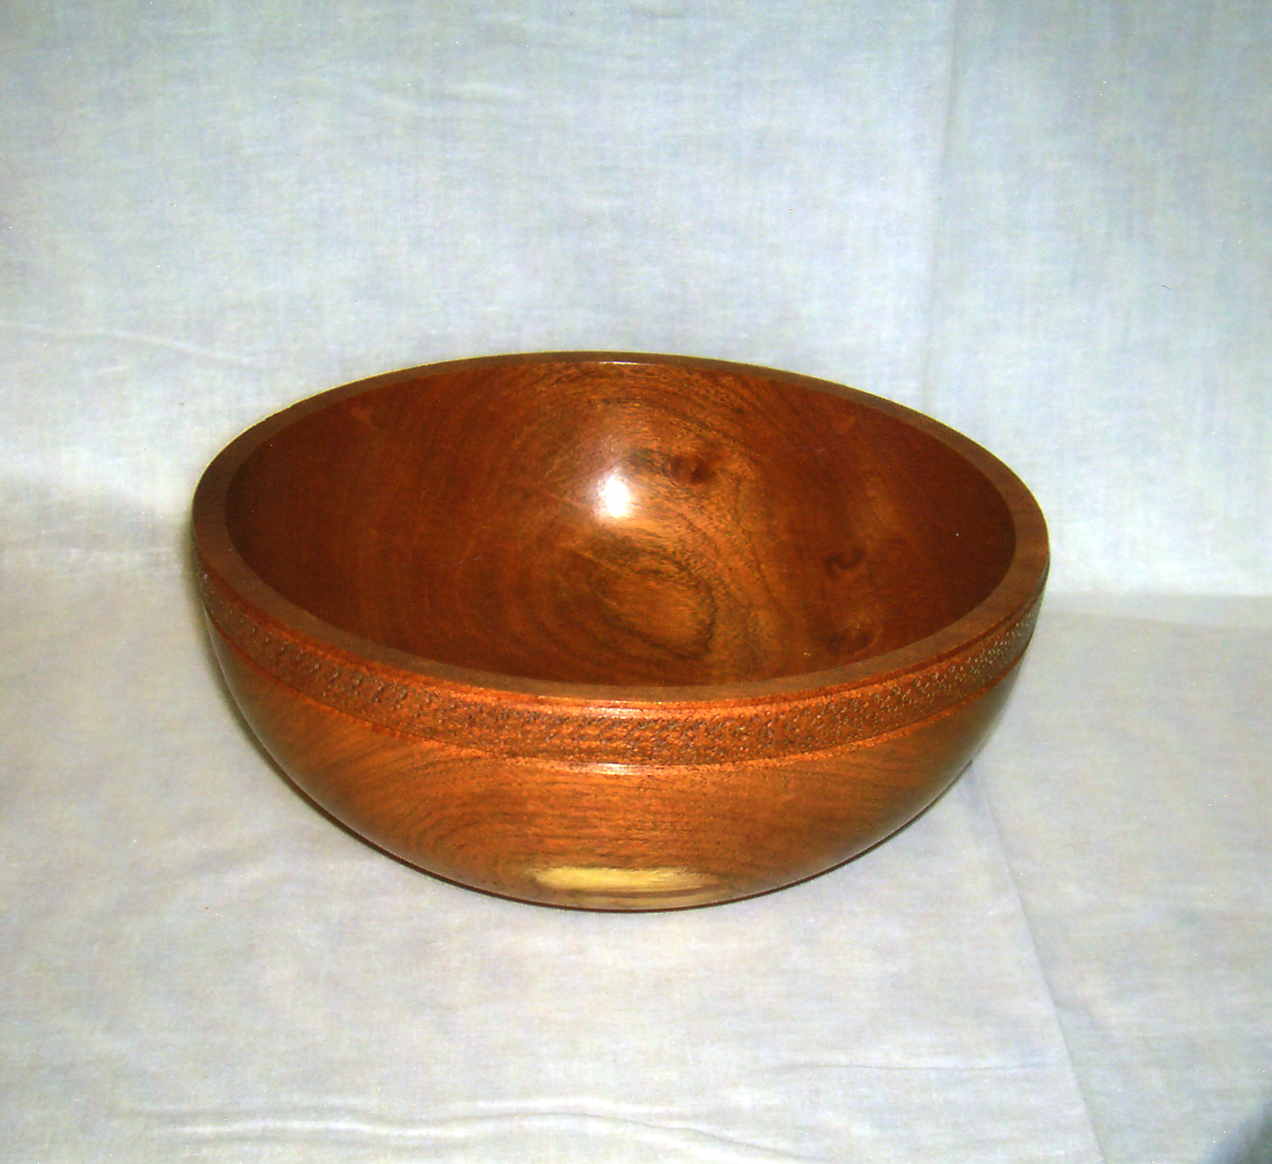 Mesquite bowl with texturised band